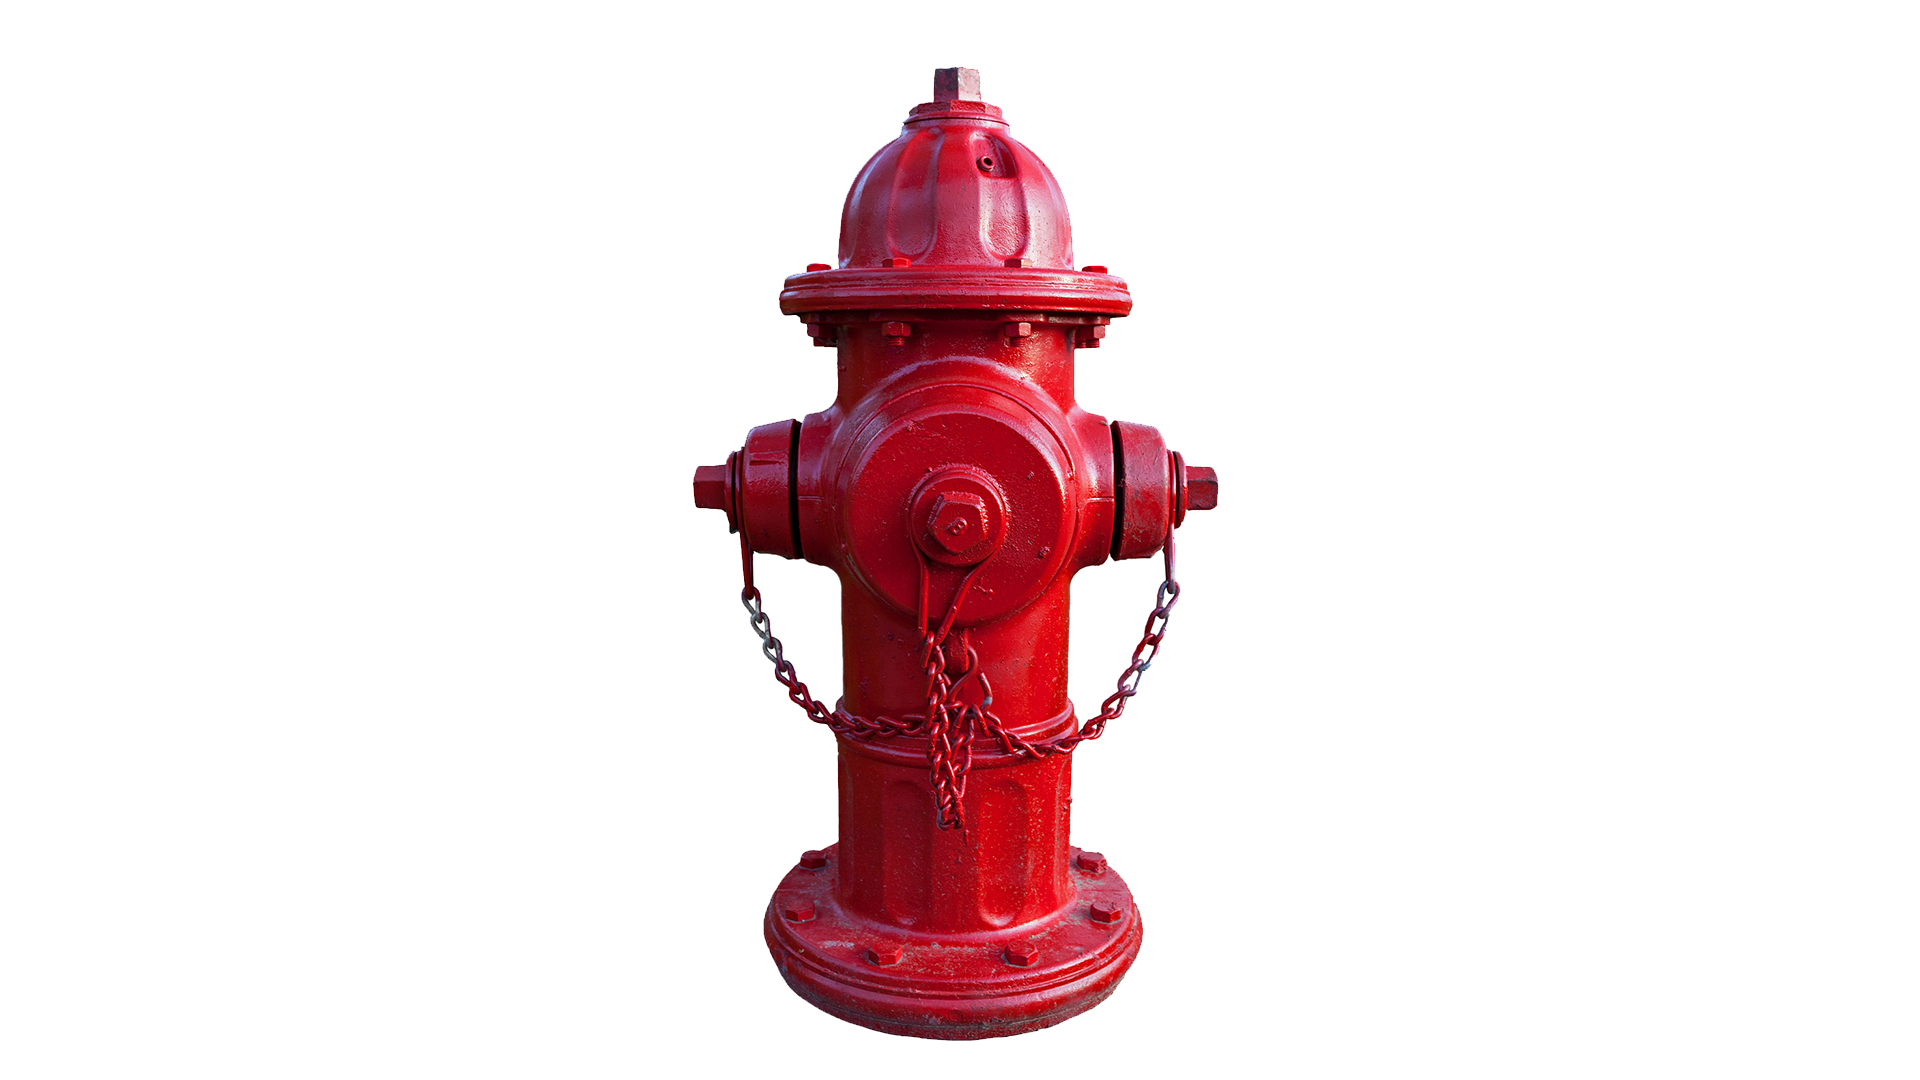 Fire hydrant 2